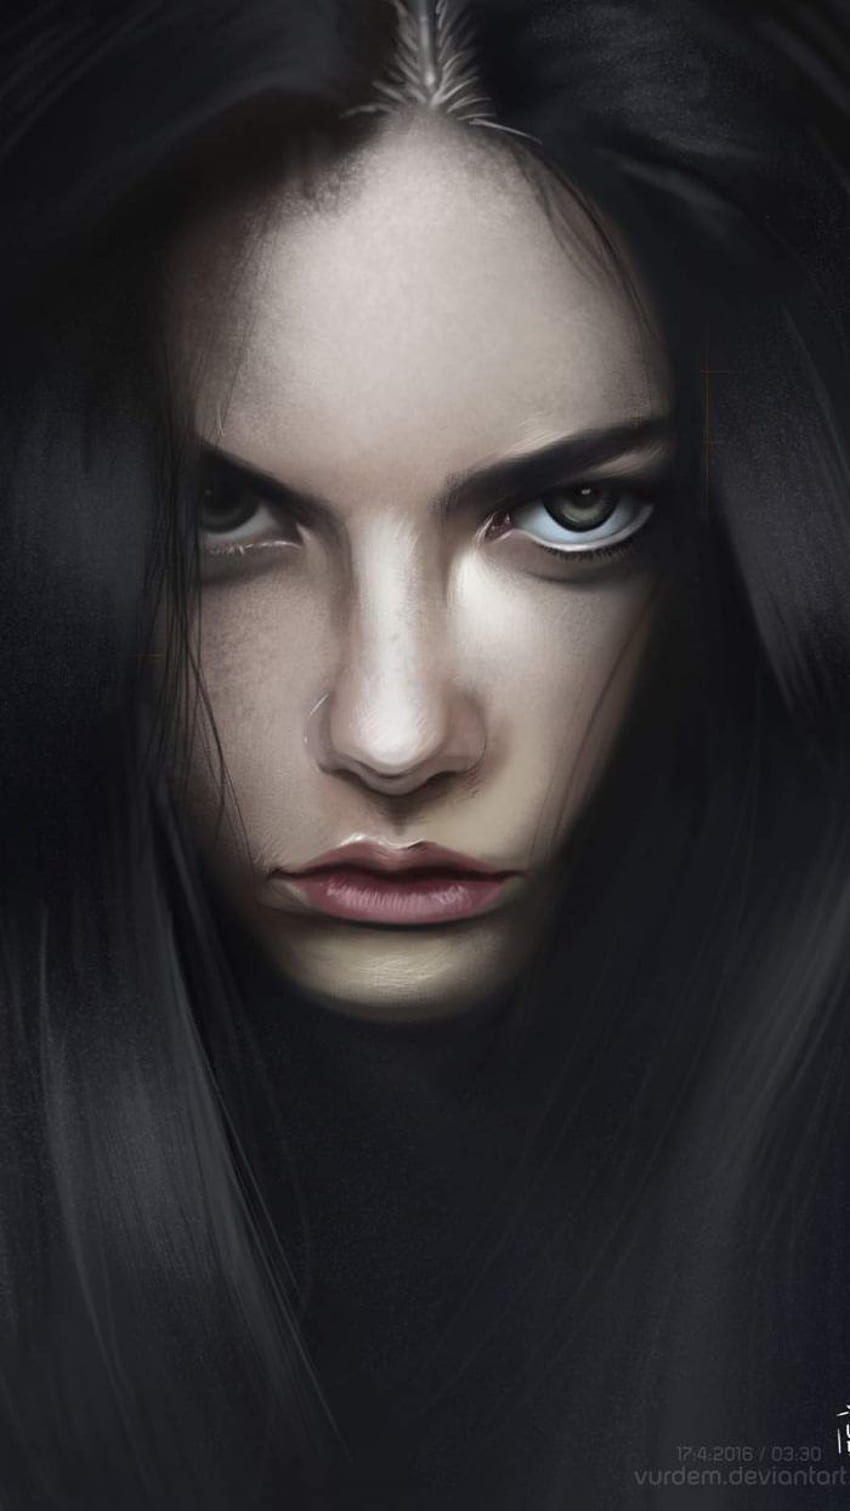 Pretty Girl iPhone - iPhone : iPhone . Angry women, Digital painting portrait, Girl iphone , Mad Girl HD phone wallpaper